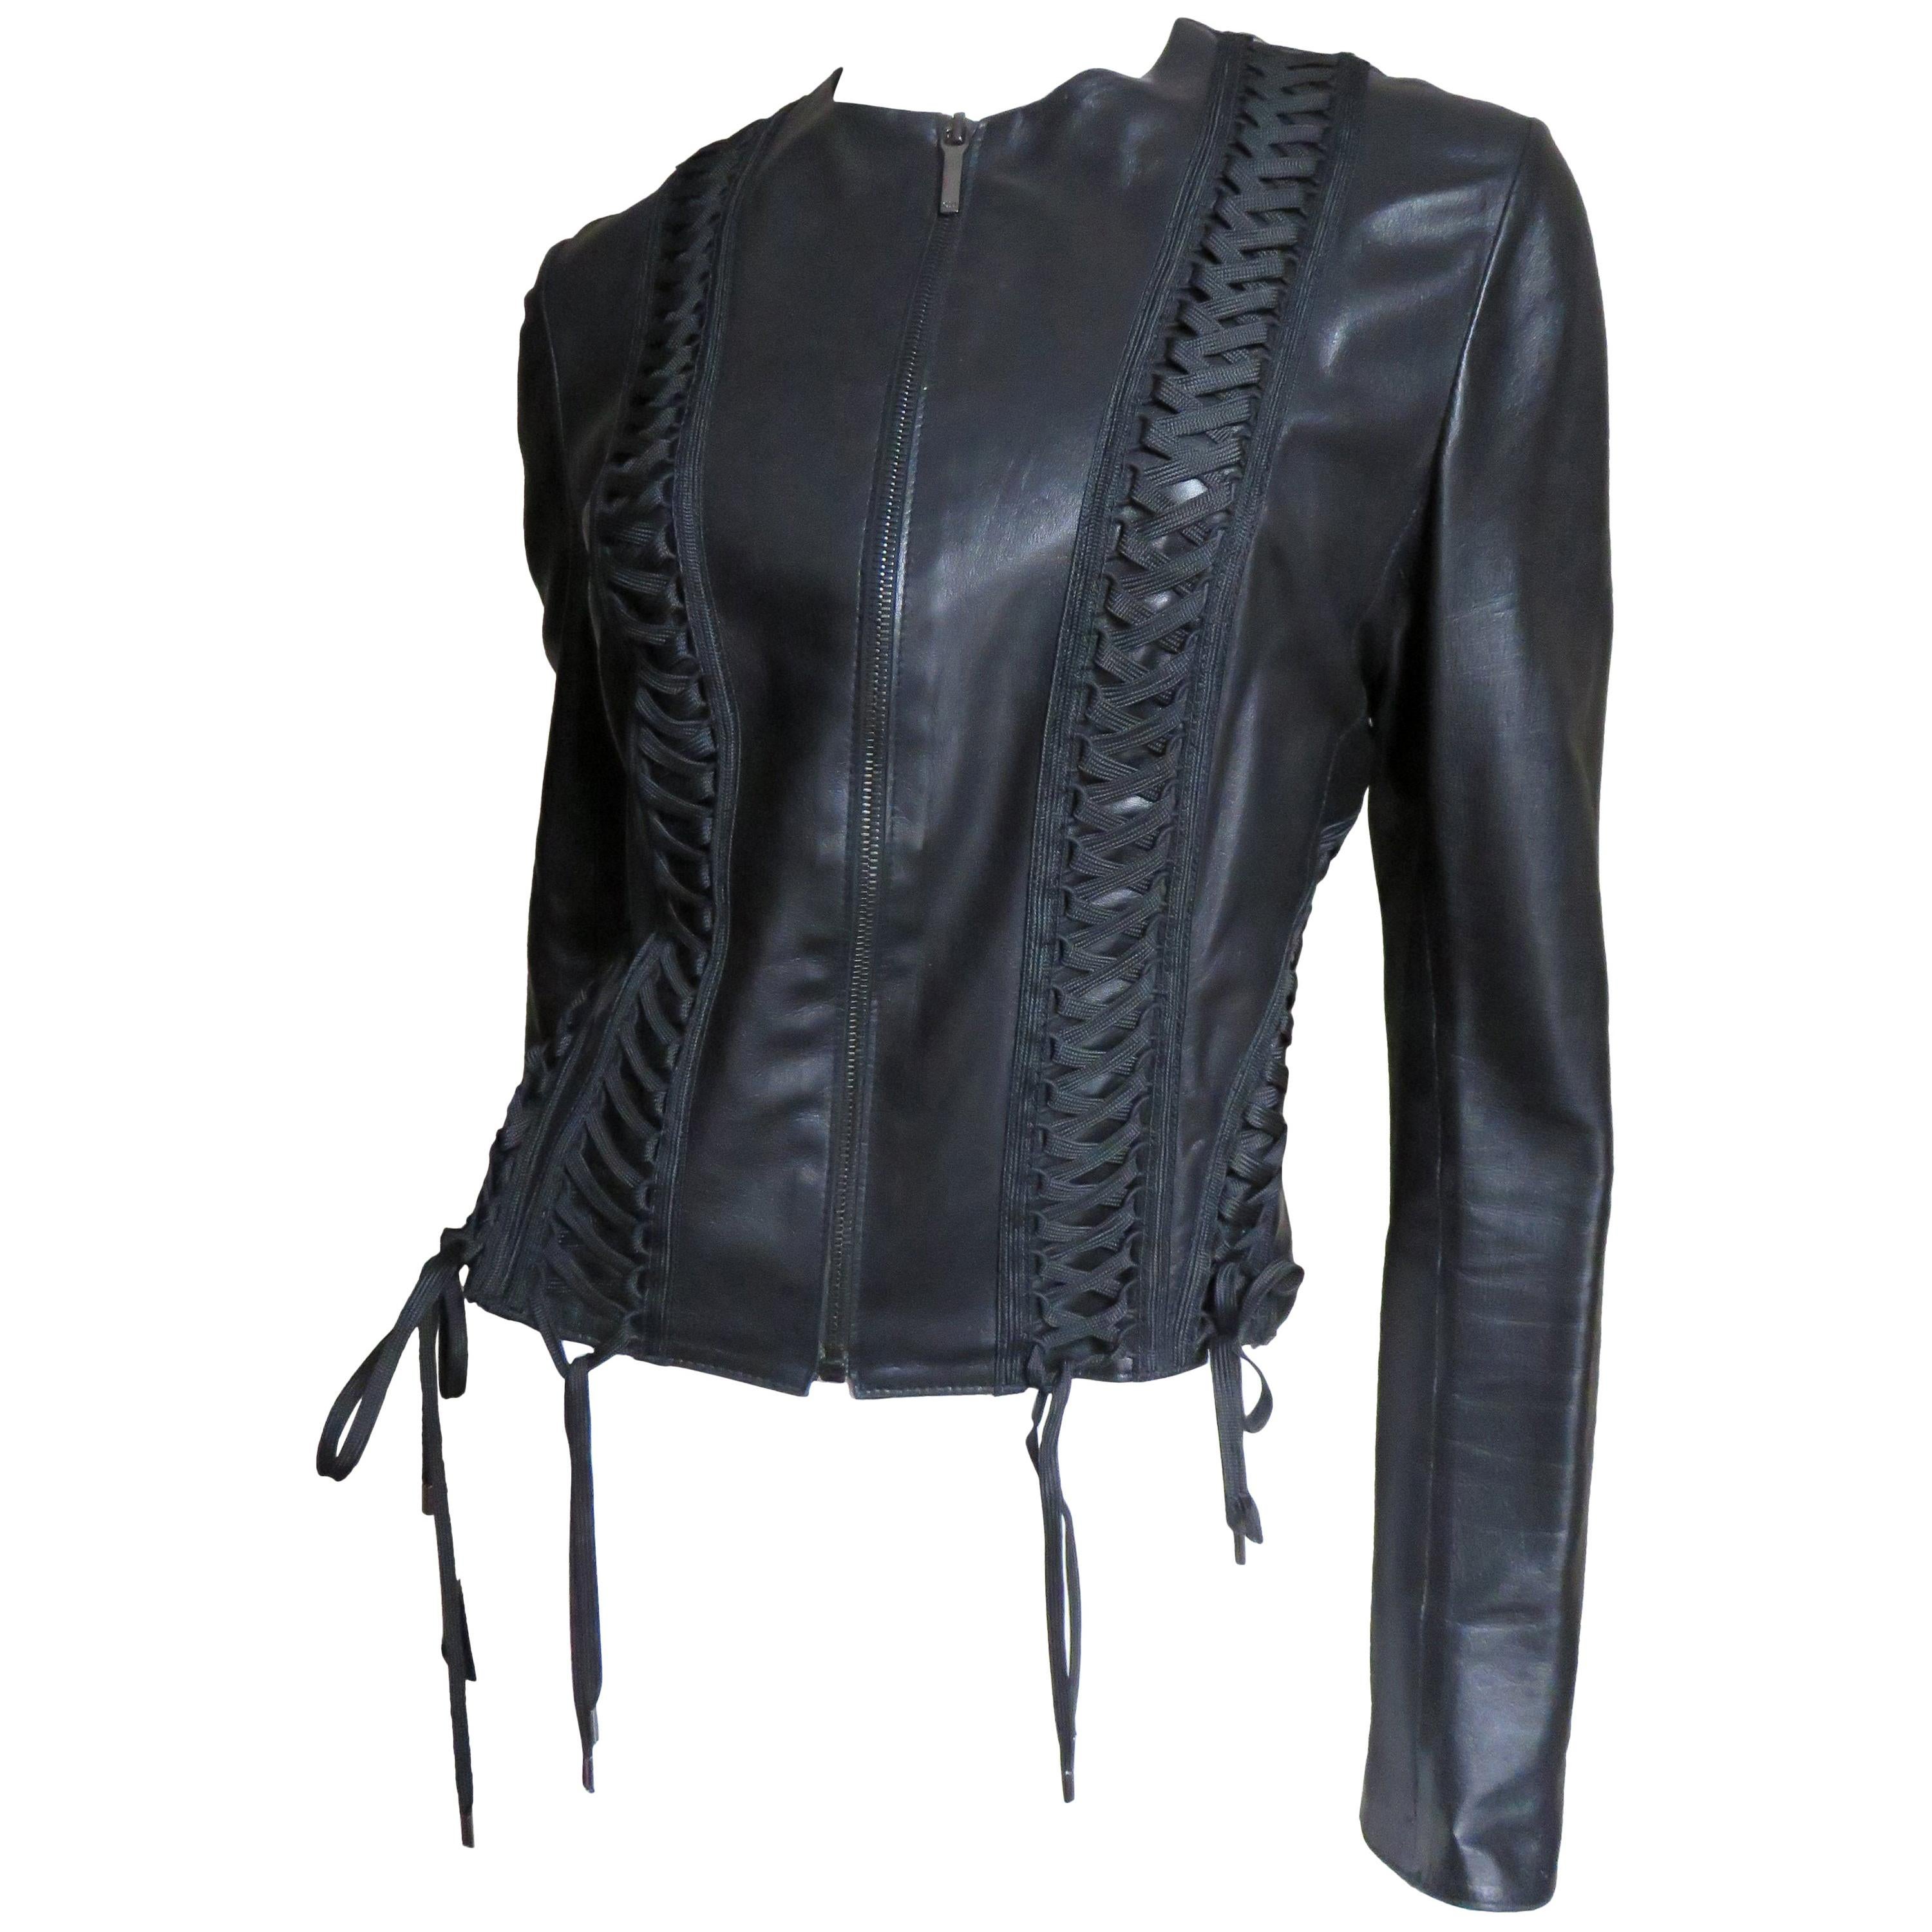 Christian Dior by John Galliano Lace-up Leather Jacket